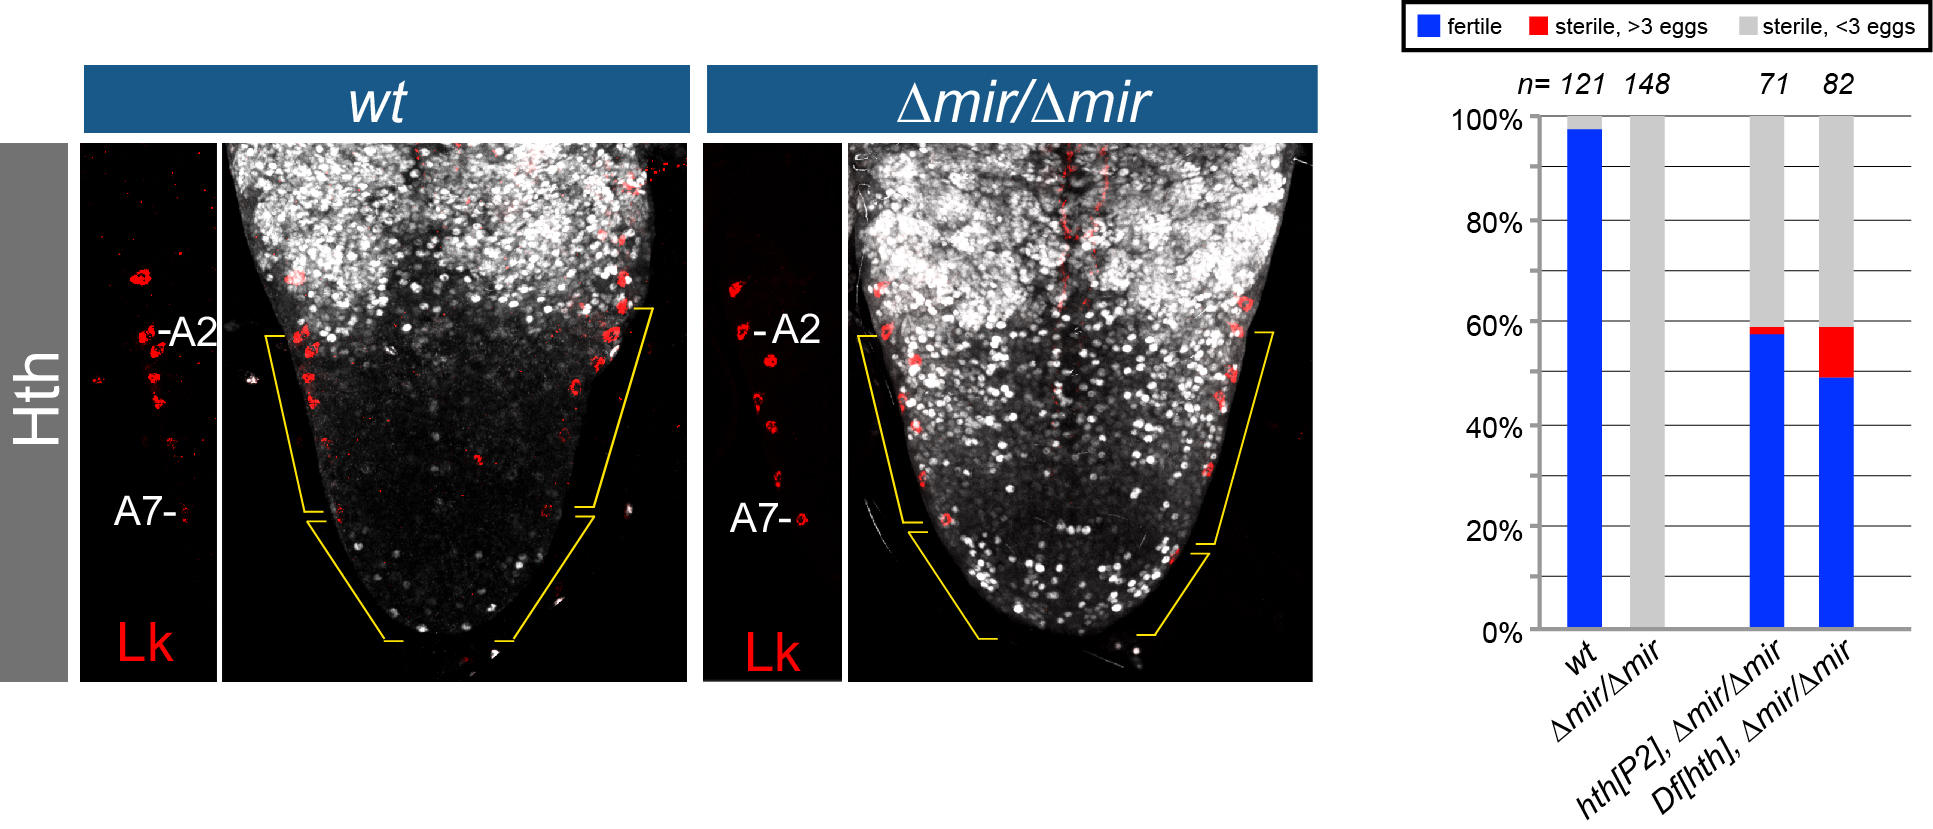 Figure 2. Stringent in vivo target regulation by a neural miRNA. (Left) Shown are abdominal ventral nerve cords in wildtype and knockout of mir-iab-4/8 (∆mir) stained for Lk (to register segments) and for the miRNA target Hth. There is massive derepression in the miRNA knockout. (Right) Behavioral defect in ∆mir is largely attributable to derepression of Hth. In contrast to wt, ∆mir almost completely fails to lay eggs after mating. Heterozygosity for hth, achieved by two different alleles, strongly rescues this defect. 